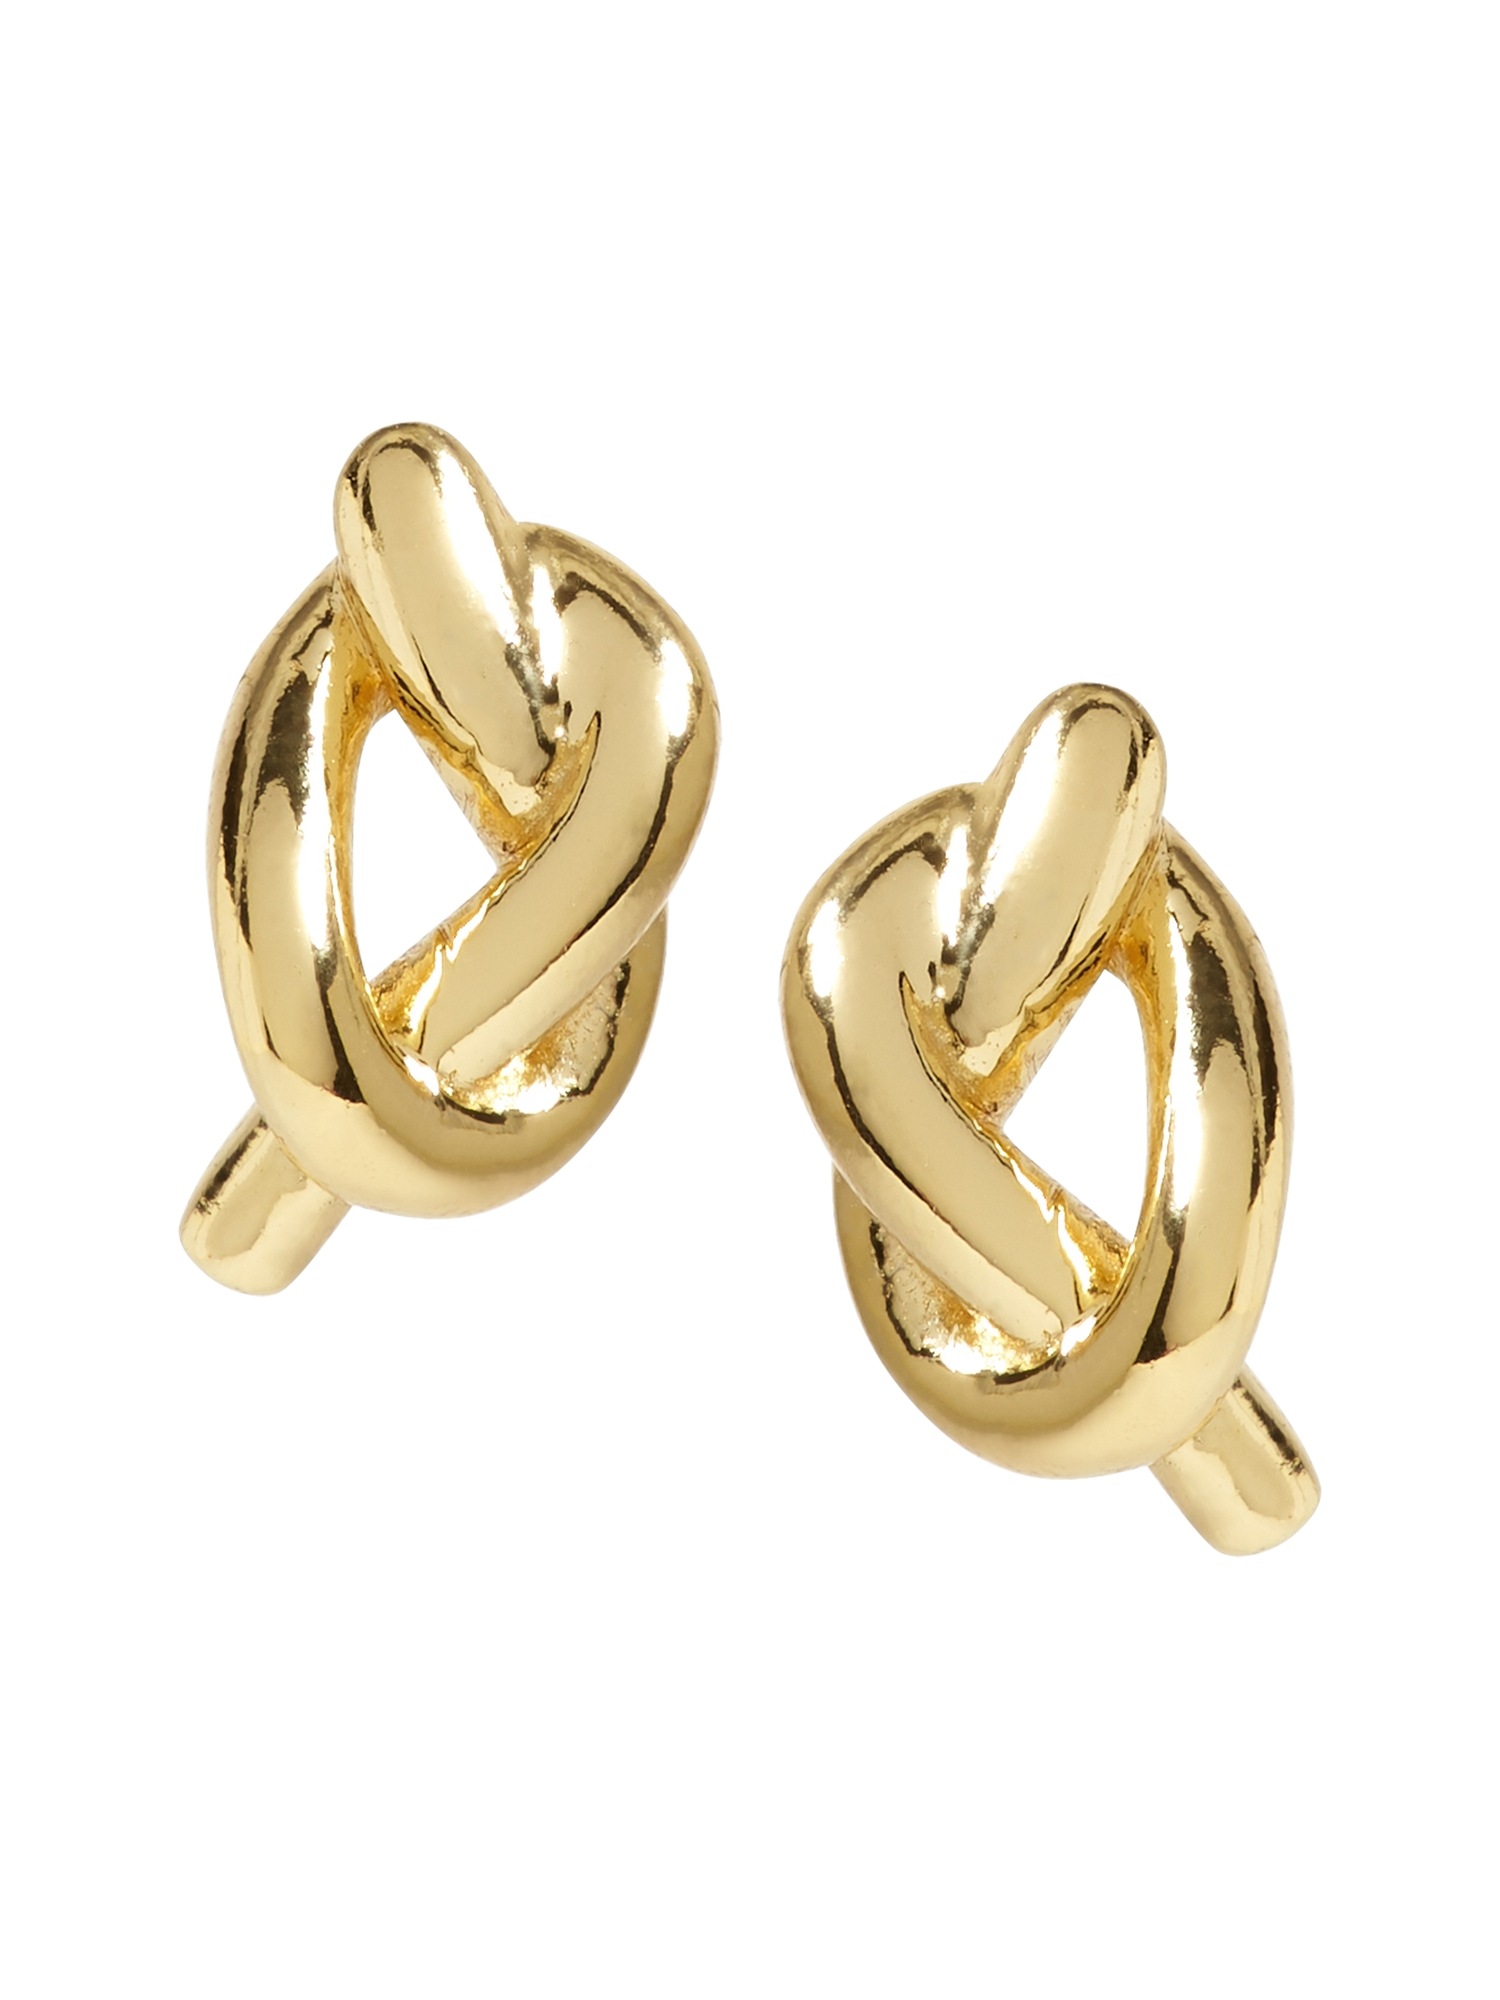 Everyday Luxuries 14k Gold-Plated Knot Stud